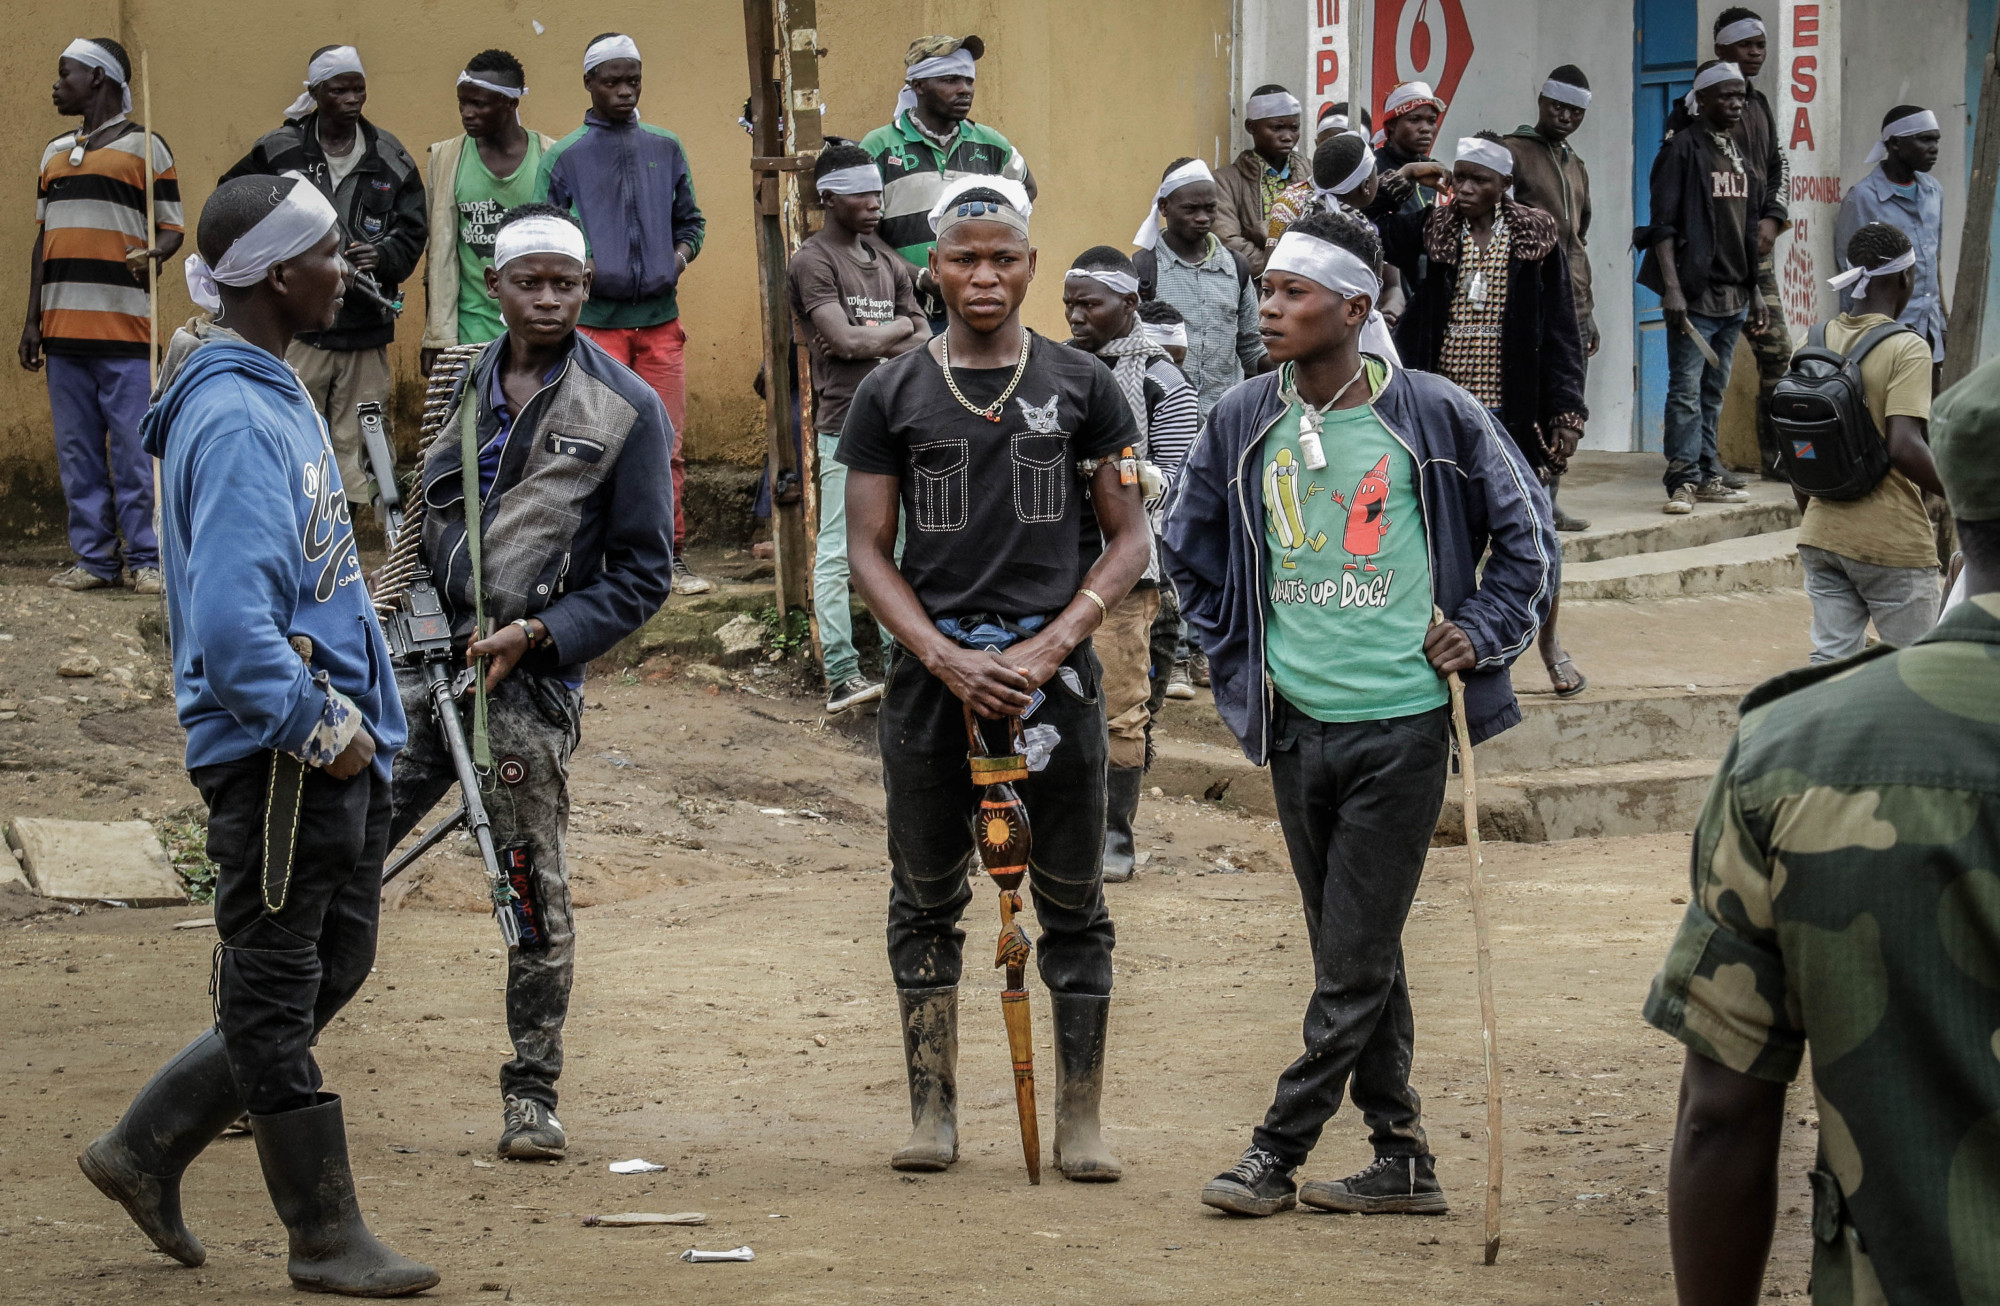 Bunia, DRC, September 4, 2020. More than 100 heavily armed CODECO militiamen caused panic when they entered the eastern Congolese city on Friday. © Dieudonné Dirole for Fondation Carmignac